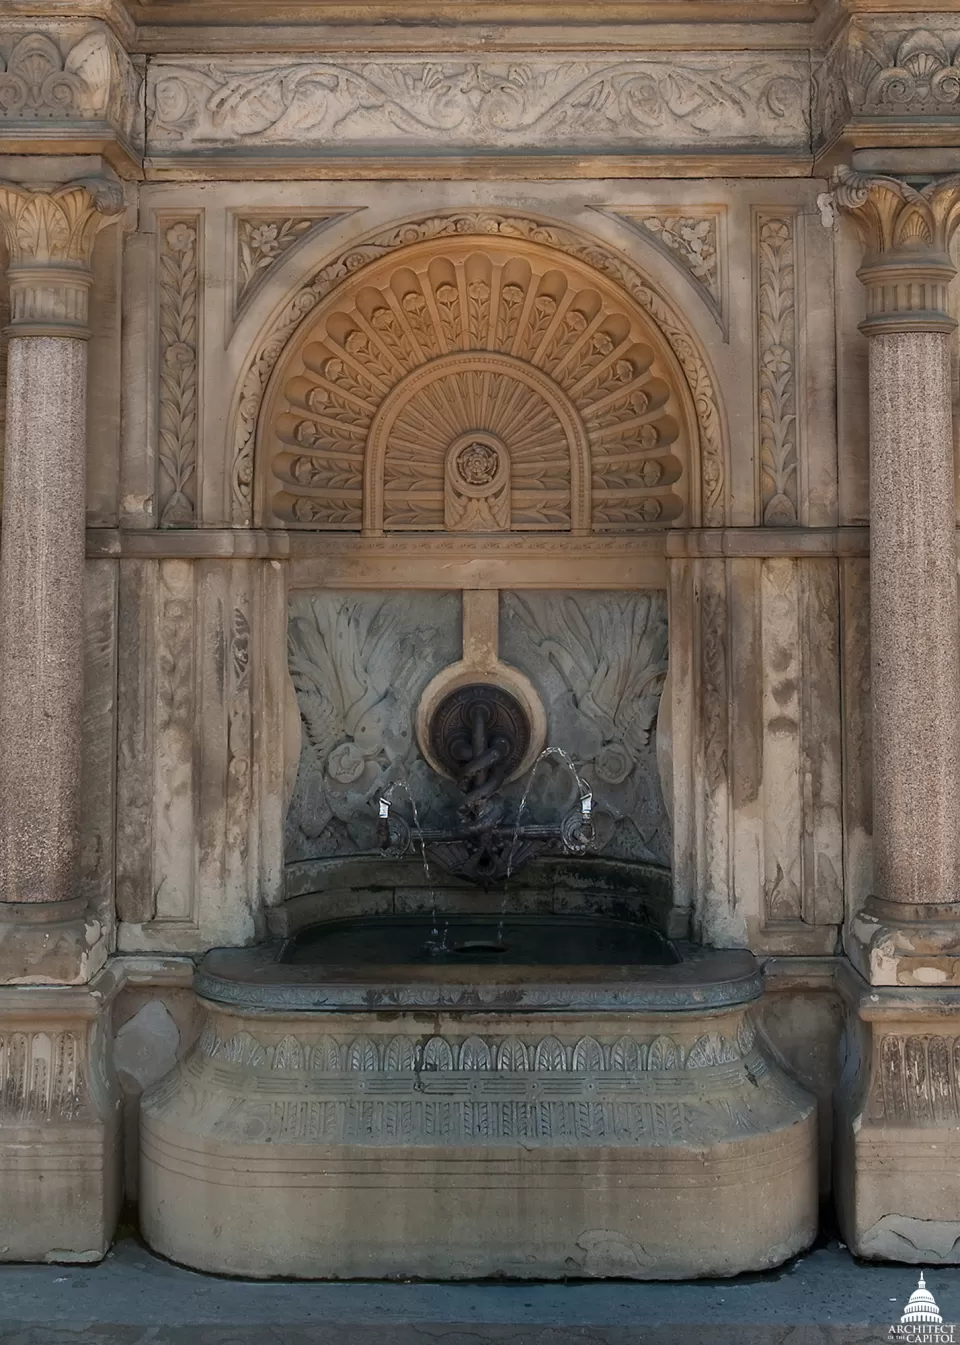 The central fountain in the perimeter wall surrounding Capitol Square.